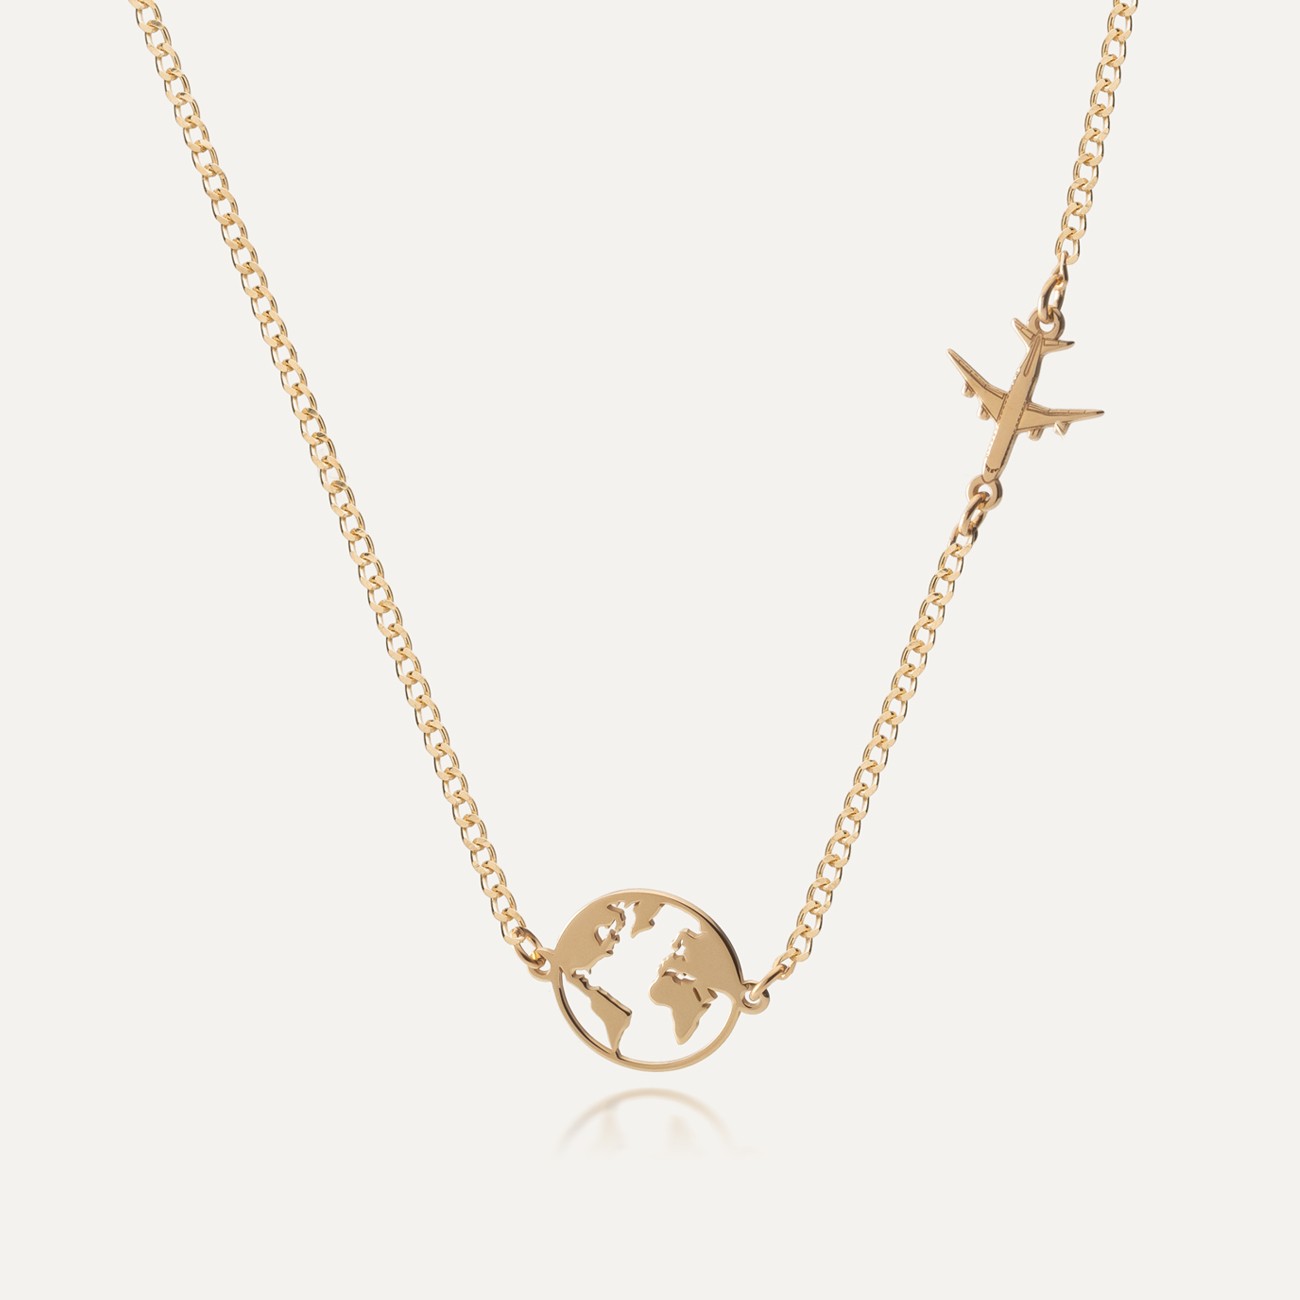 Necklace - Globe with plane, sterling silver 925